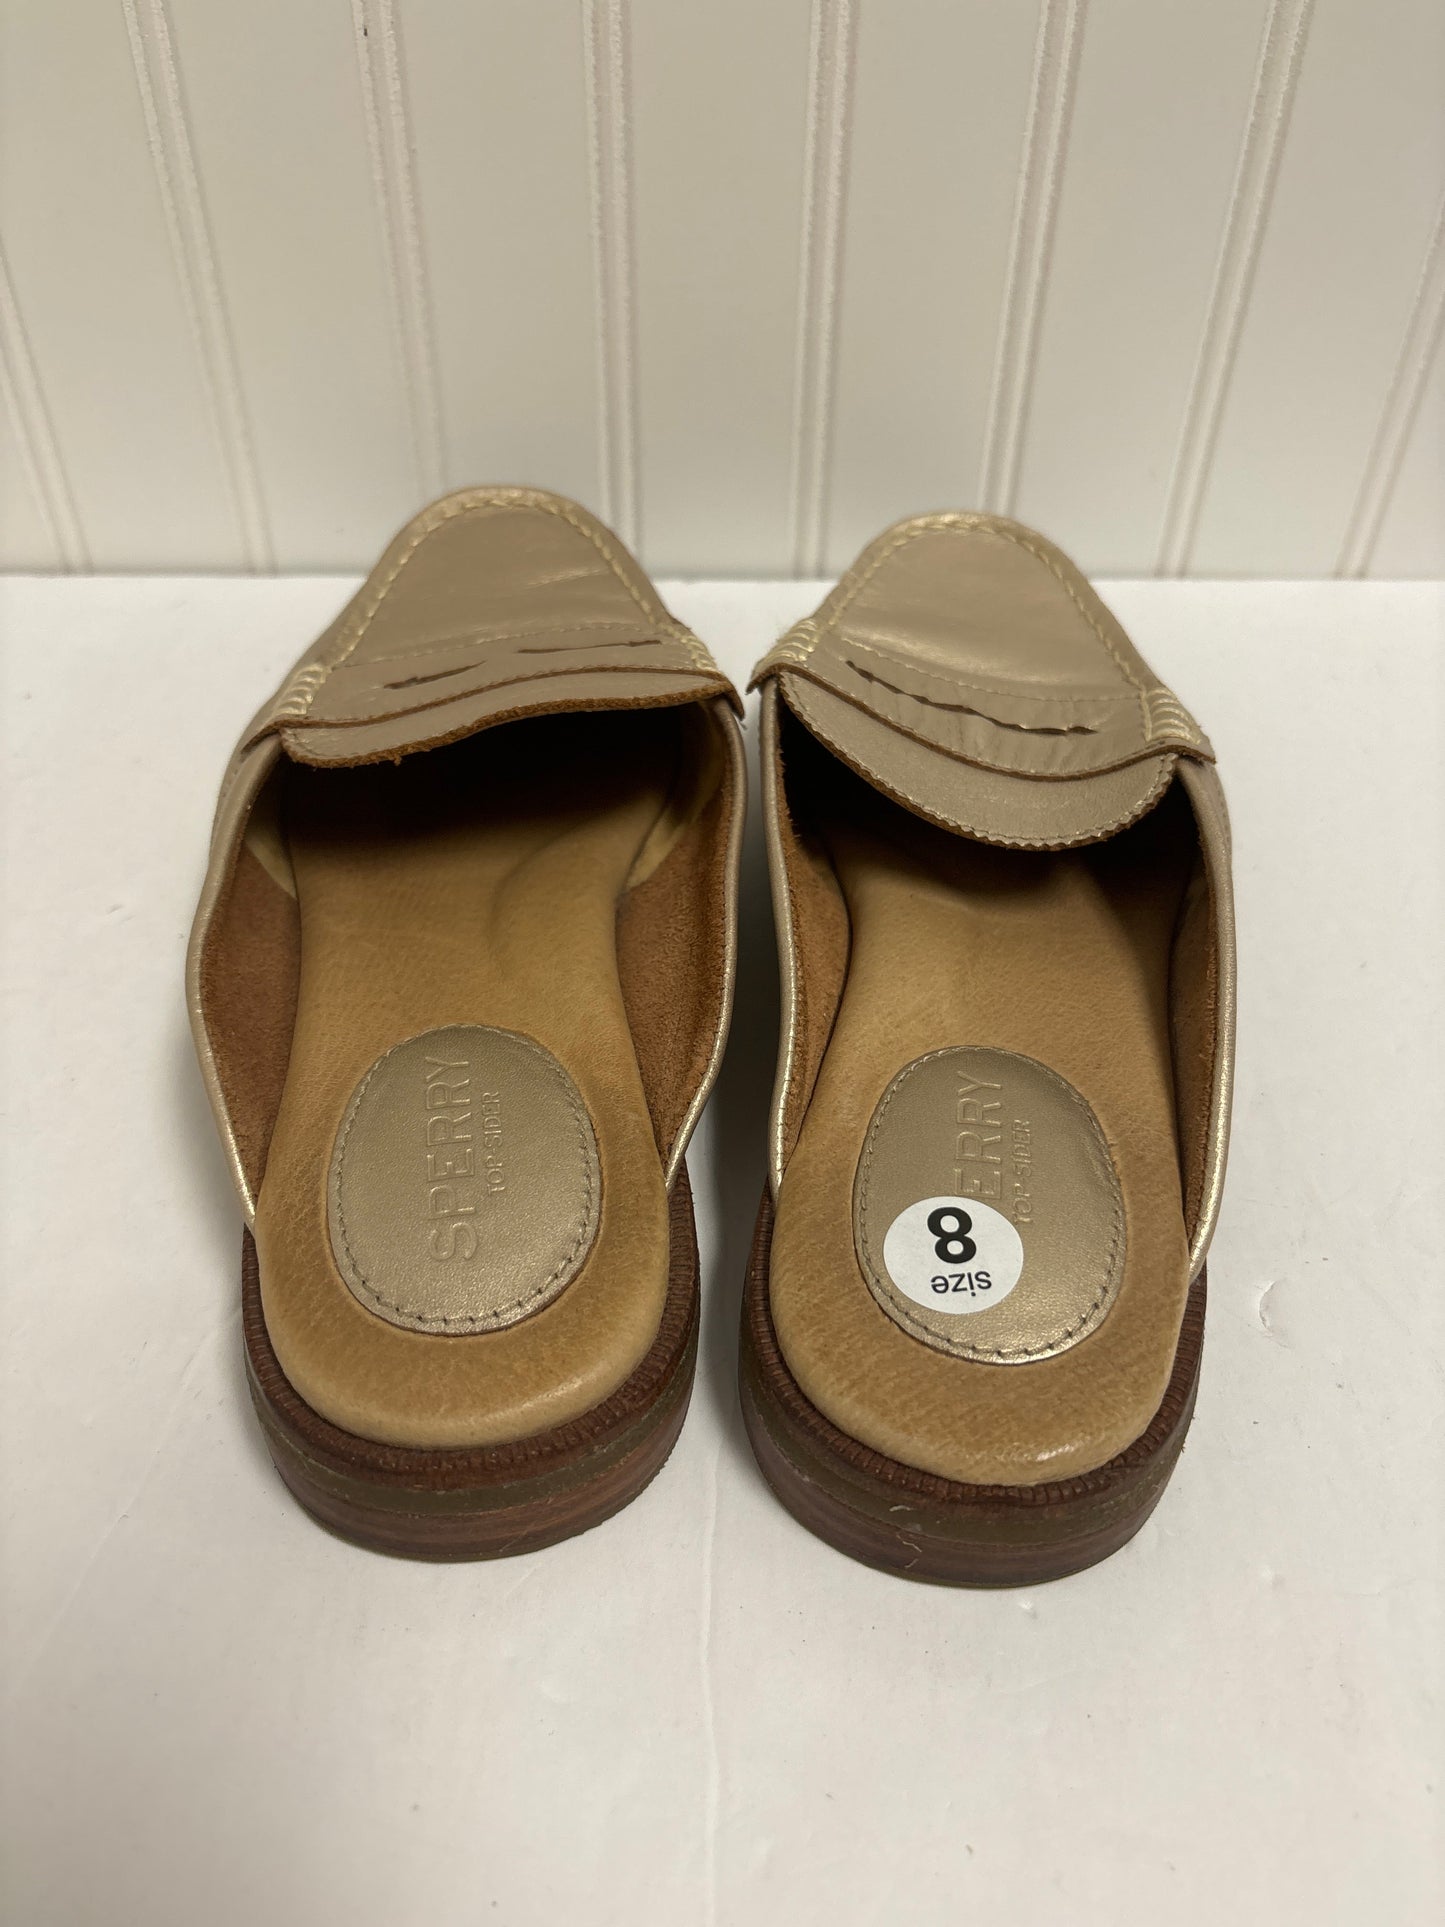 Gold Shoes Flats Sperry, Size 8